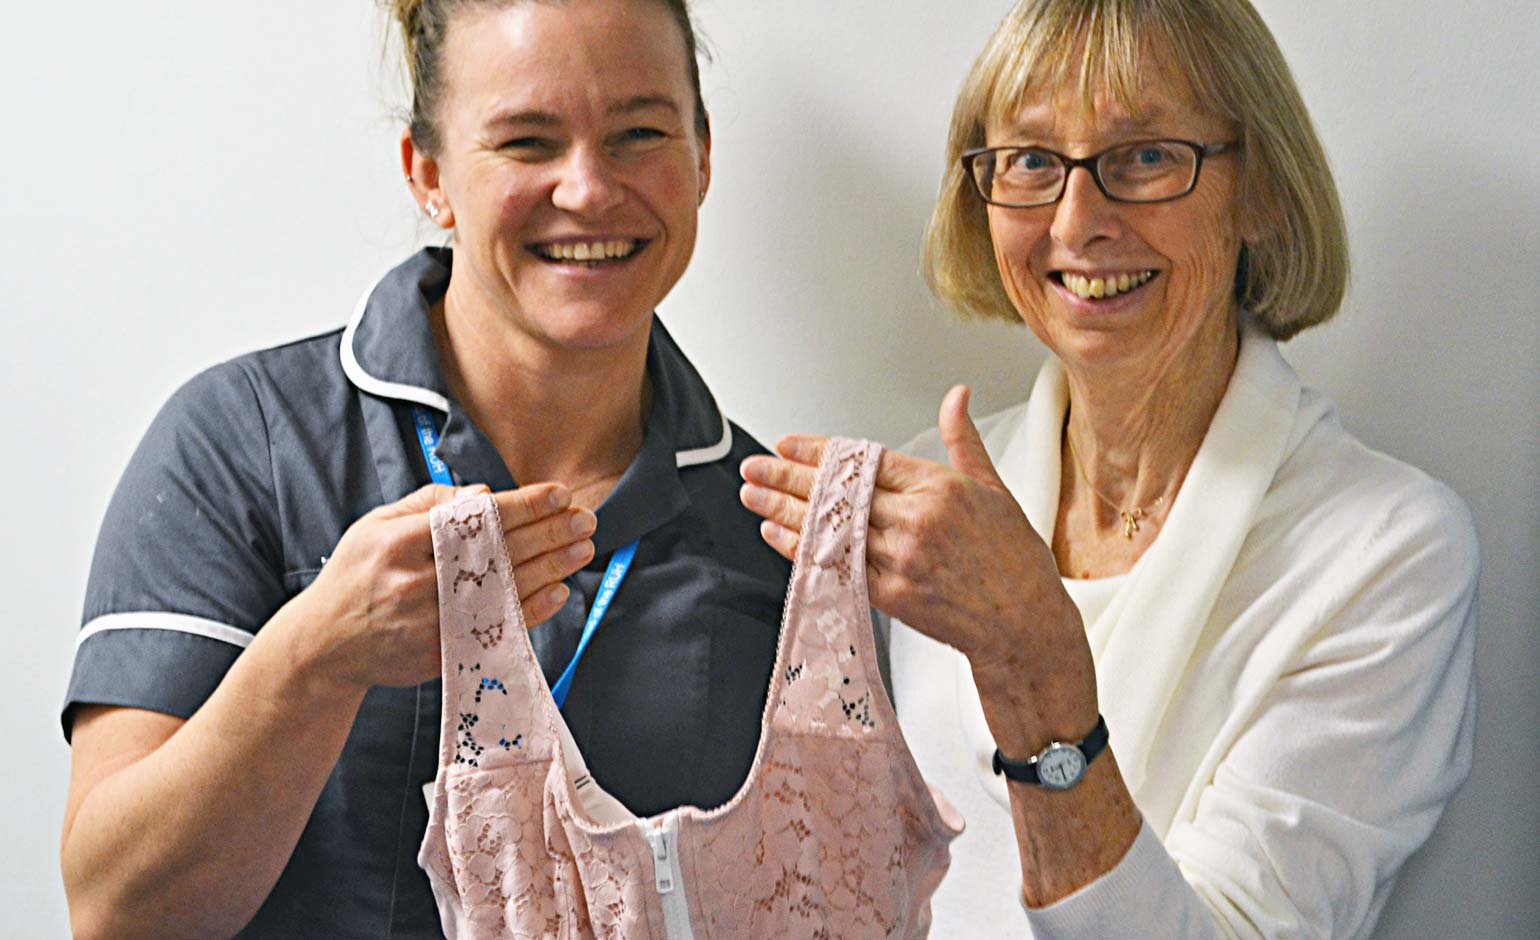 Stella McCartney bra donation helps support RUH's breast cancer patients